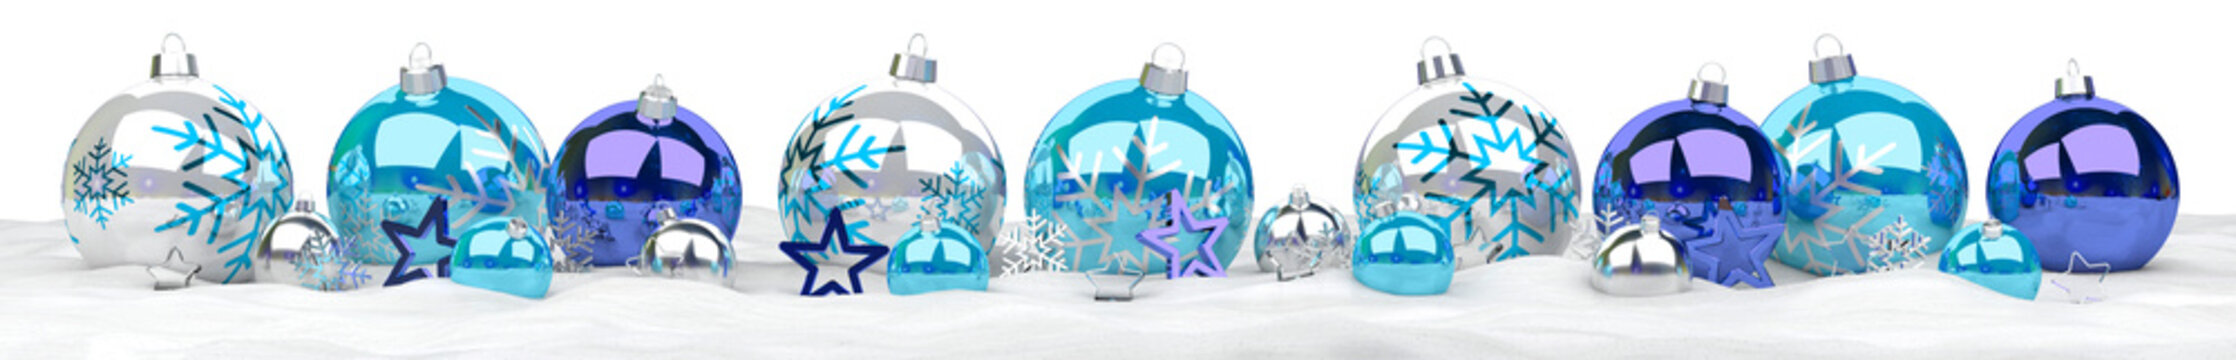 Isolated glossy christmas decoration lined up on white. 3D rendering blue shiny baubles ornaments. Merry Xmas cut out background